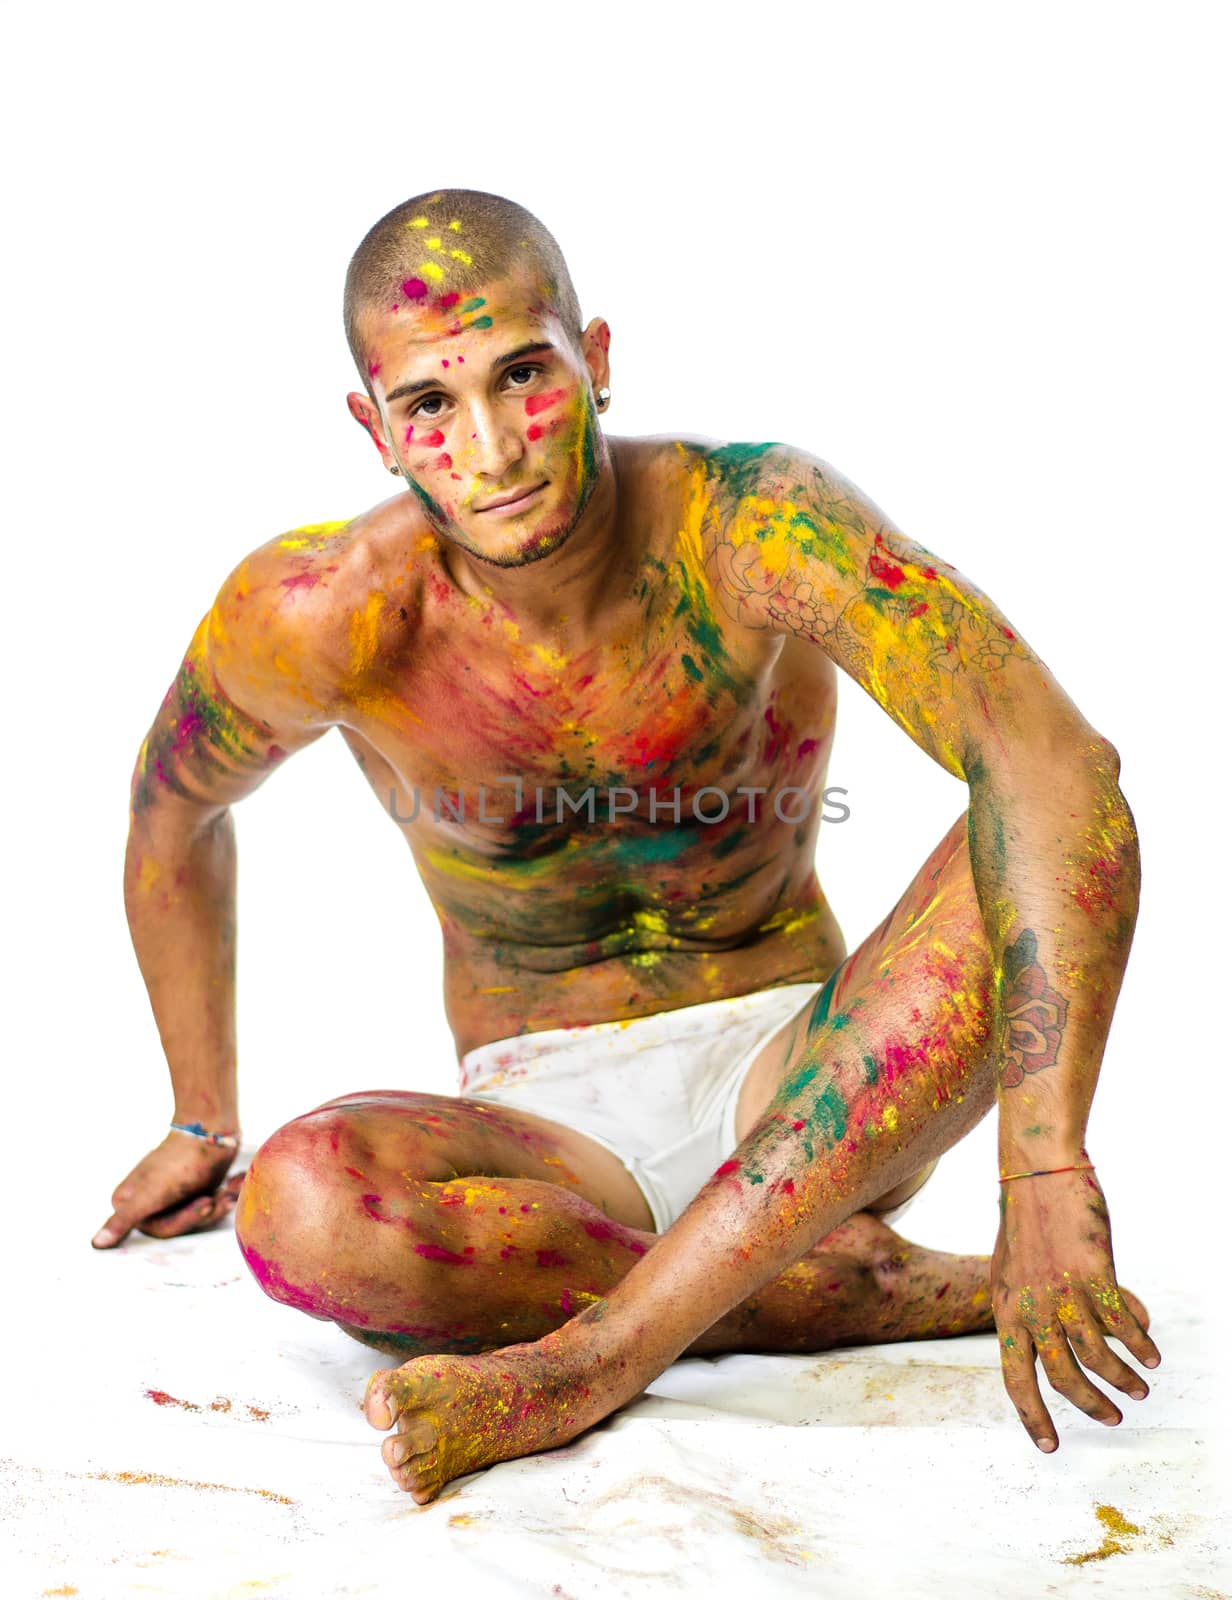 Attractive young man shirtless, skin painted all over with bright Holi colors, looking at camera, sitting, isolated on white background